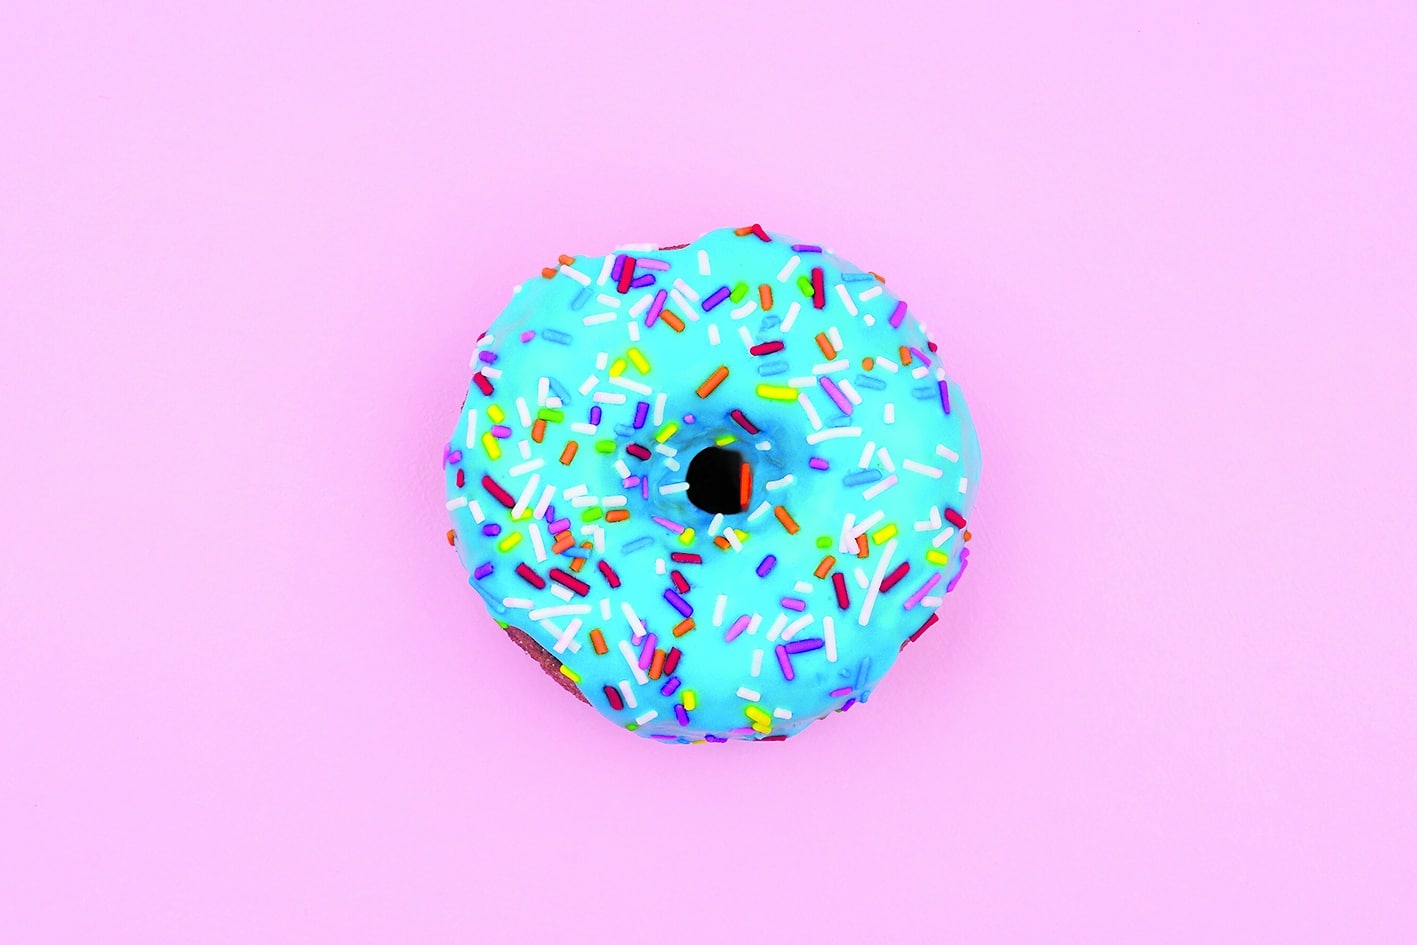 Looking at the doughnut or the hole?